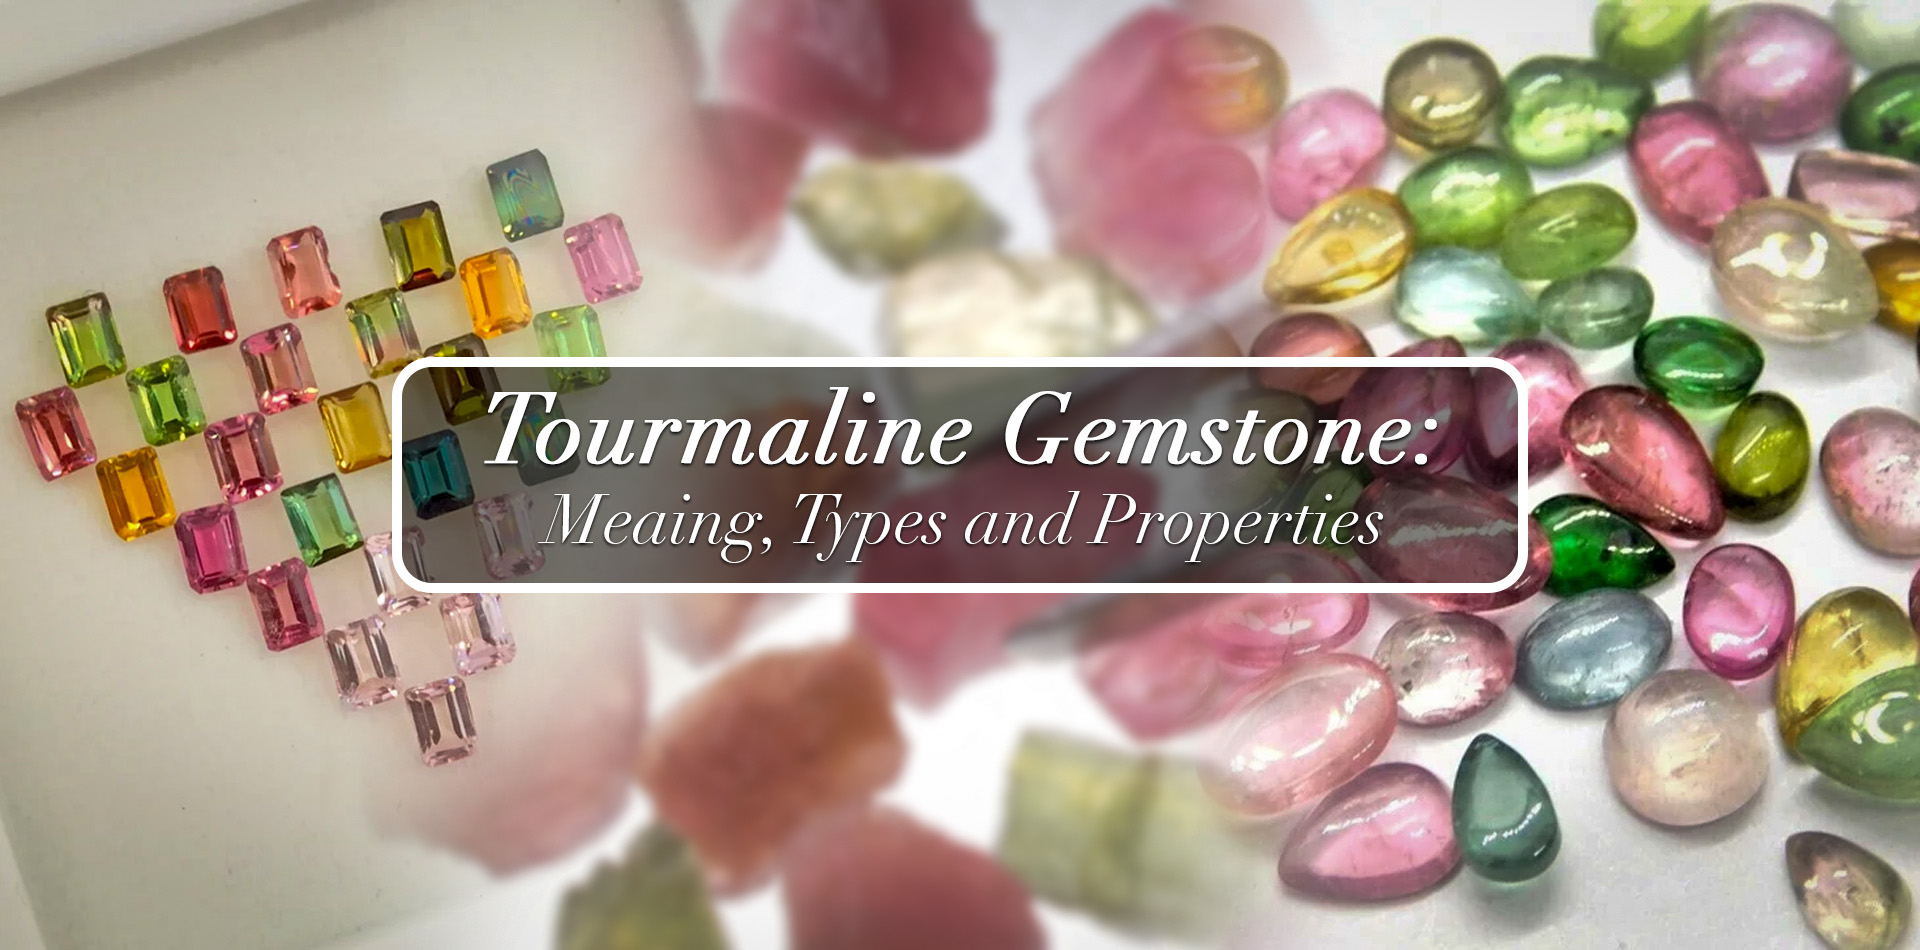 Tourmaline Gemstone: Meaning, Types, and Properties